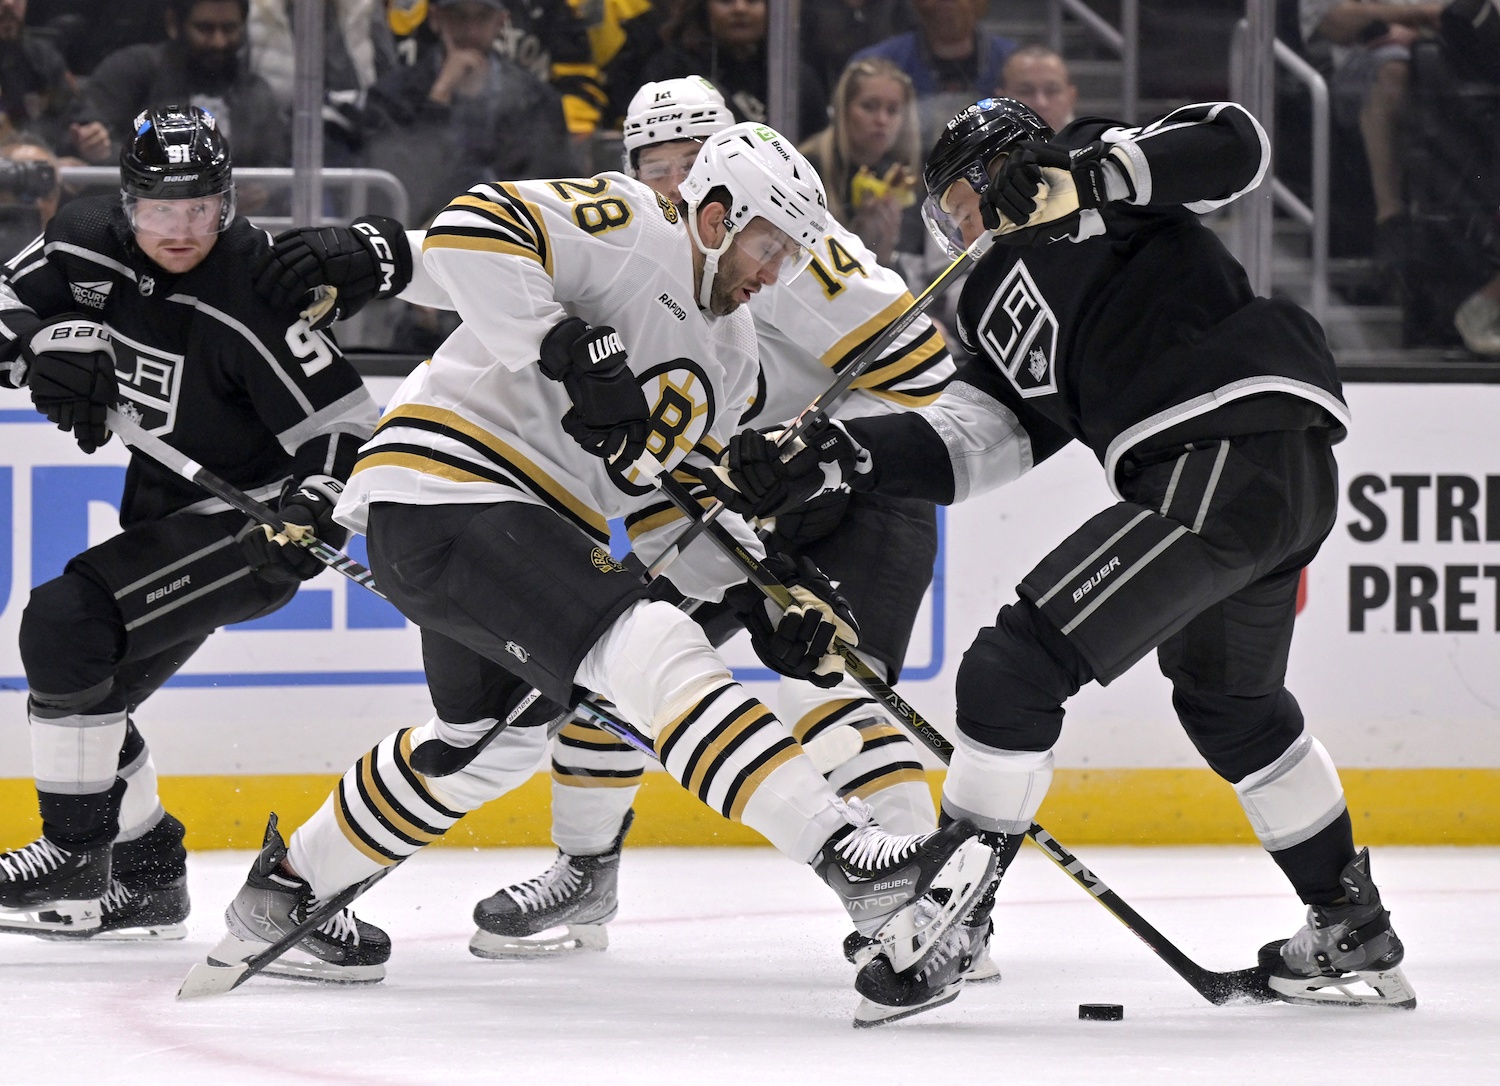 Oct 21, 2023; Los Angeles, California, USA; Boston Bruins defenseman Derek Forbort (28) vies to control the puck with Los Angeles Kings center Trevor Lewis (right) during the second period at Crypto.com Arena. Mandatory Credit: Alex Gallardo-USA TODAY Sports